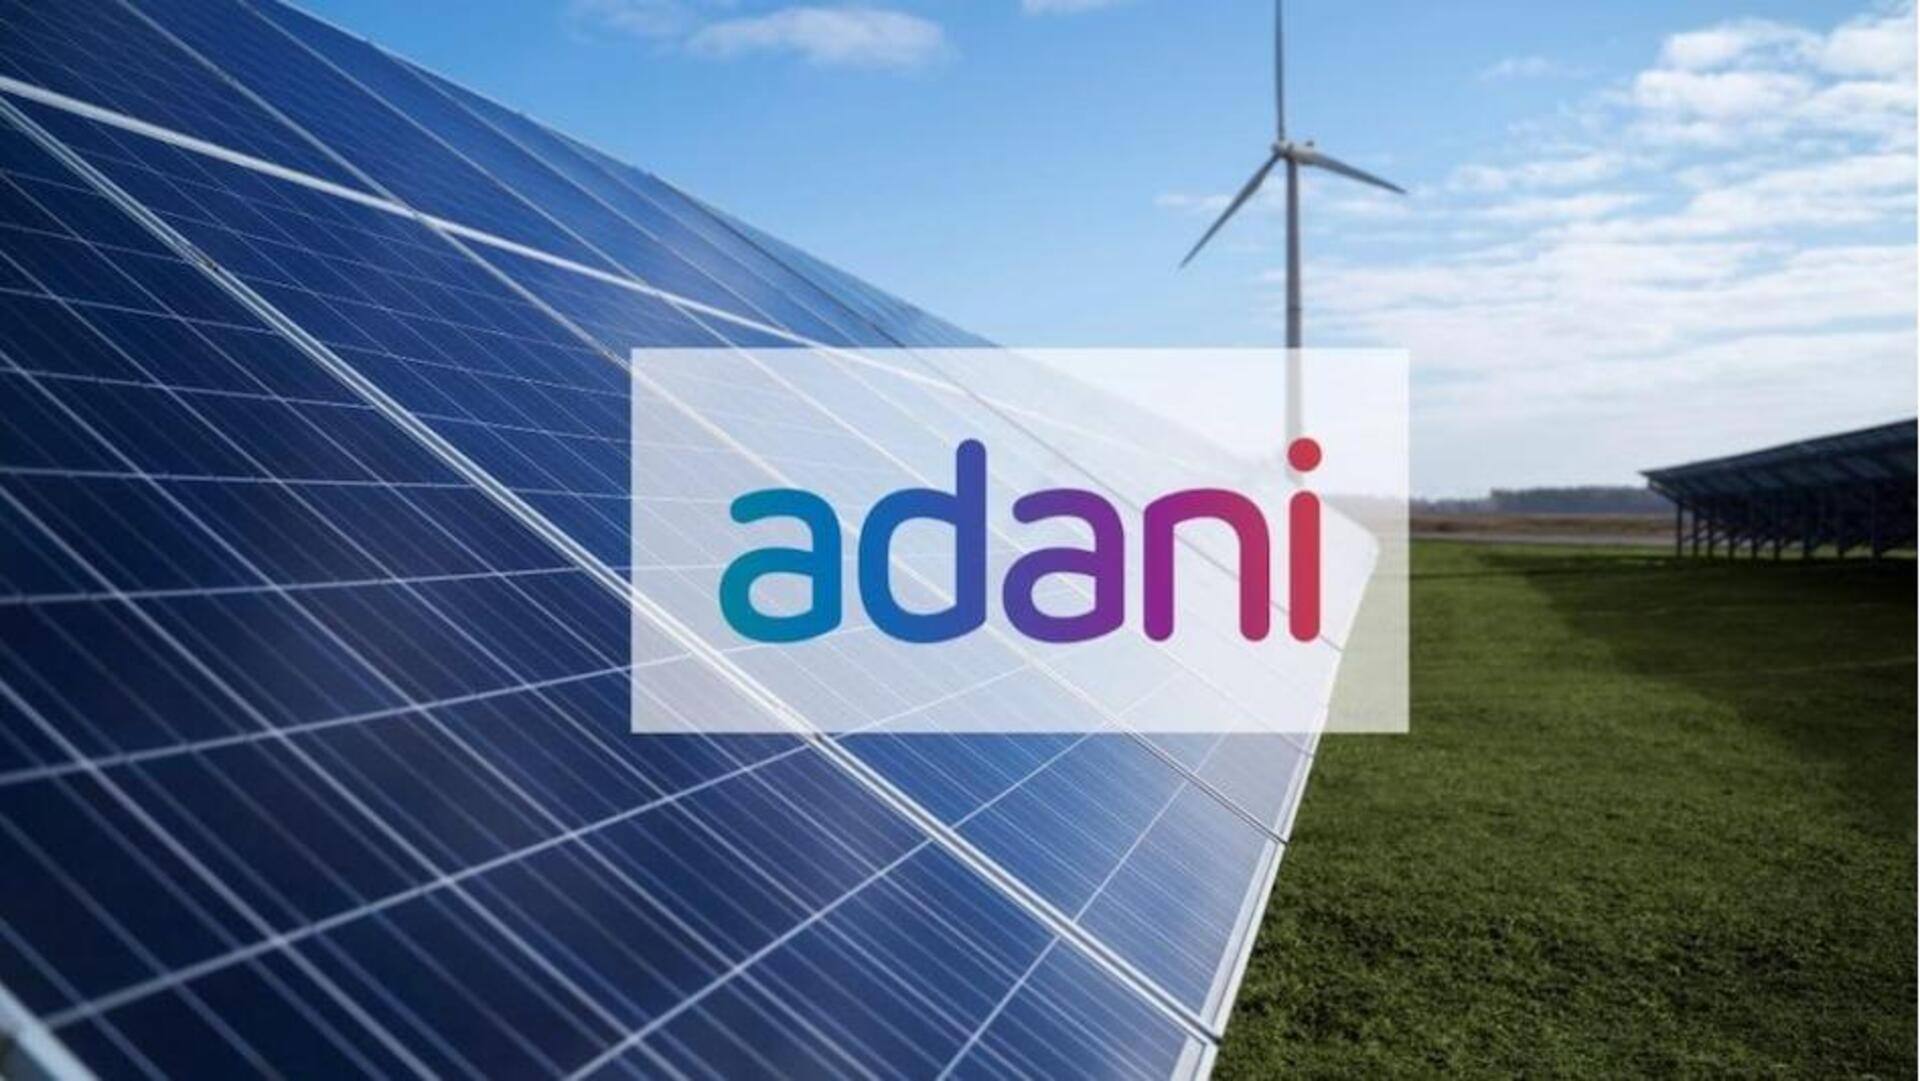 Adani Green Energy jumps 18% on securing $1.36bn funding